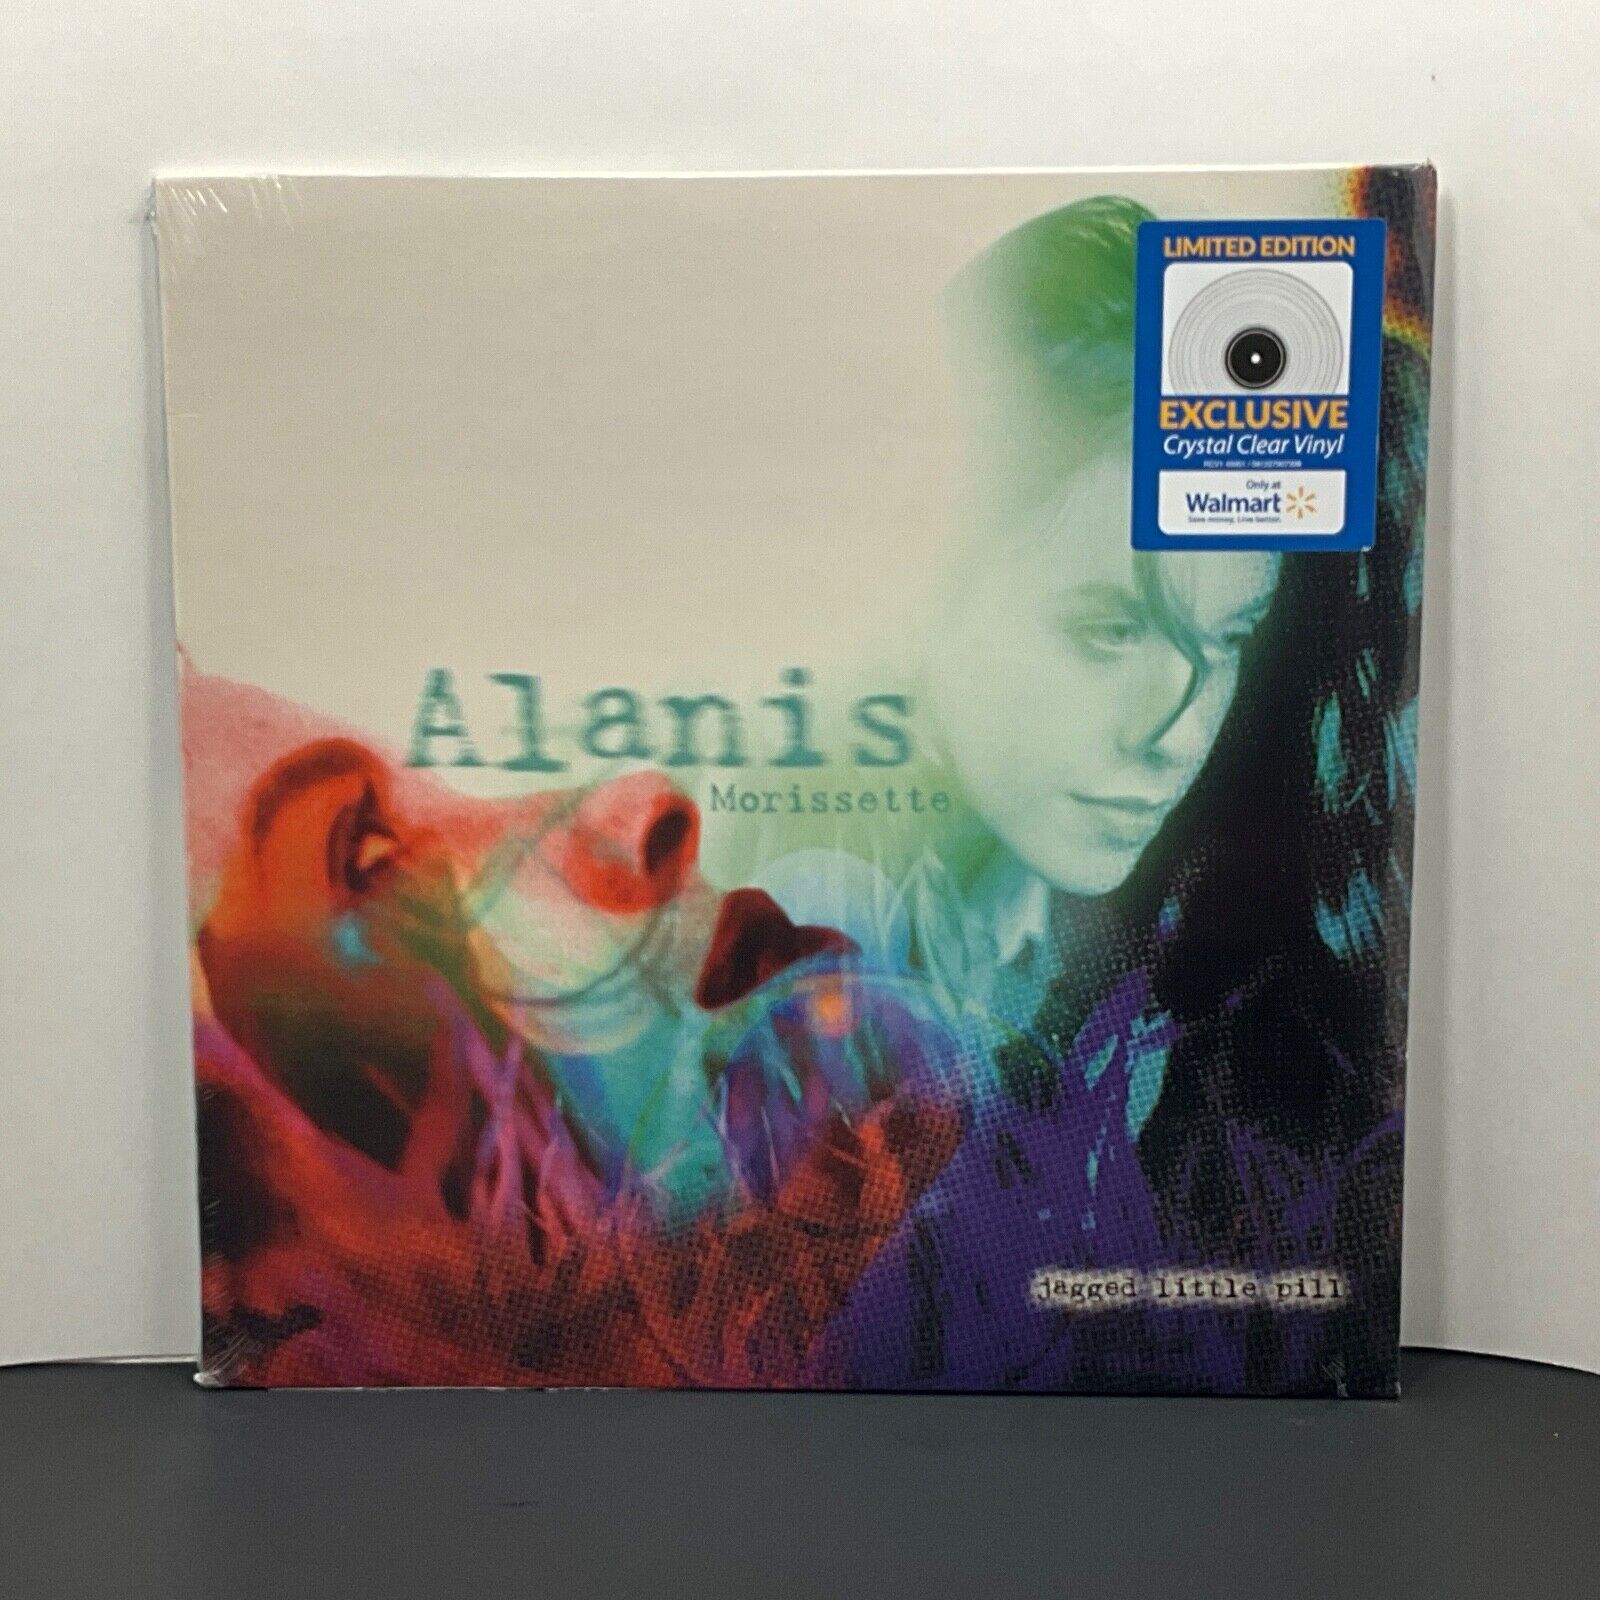 ALANIS MORISSETTE - JAGGED LITTLE PILL LP RECORD CRYSTAL CLEAR VINYL NEW/SEALED!